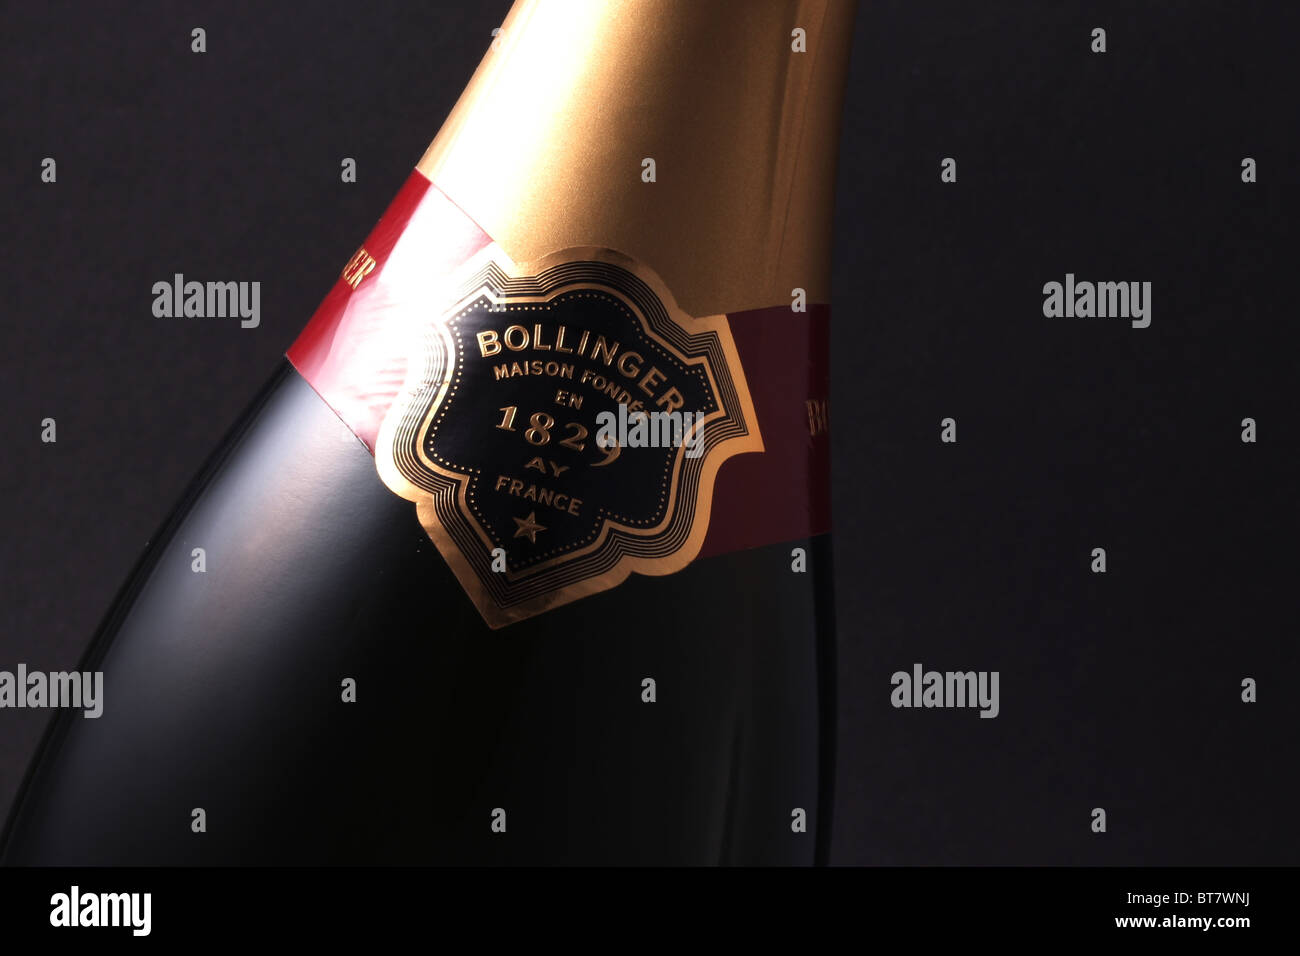 Bottle of Bollinger Special Cuvee Champagne. Stock Photo